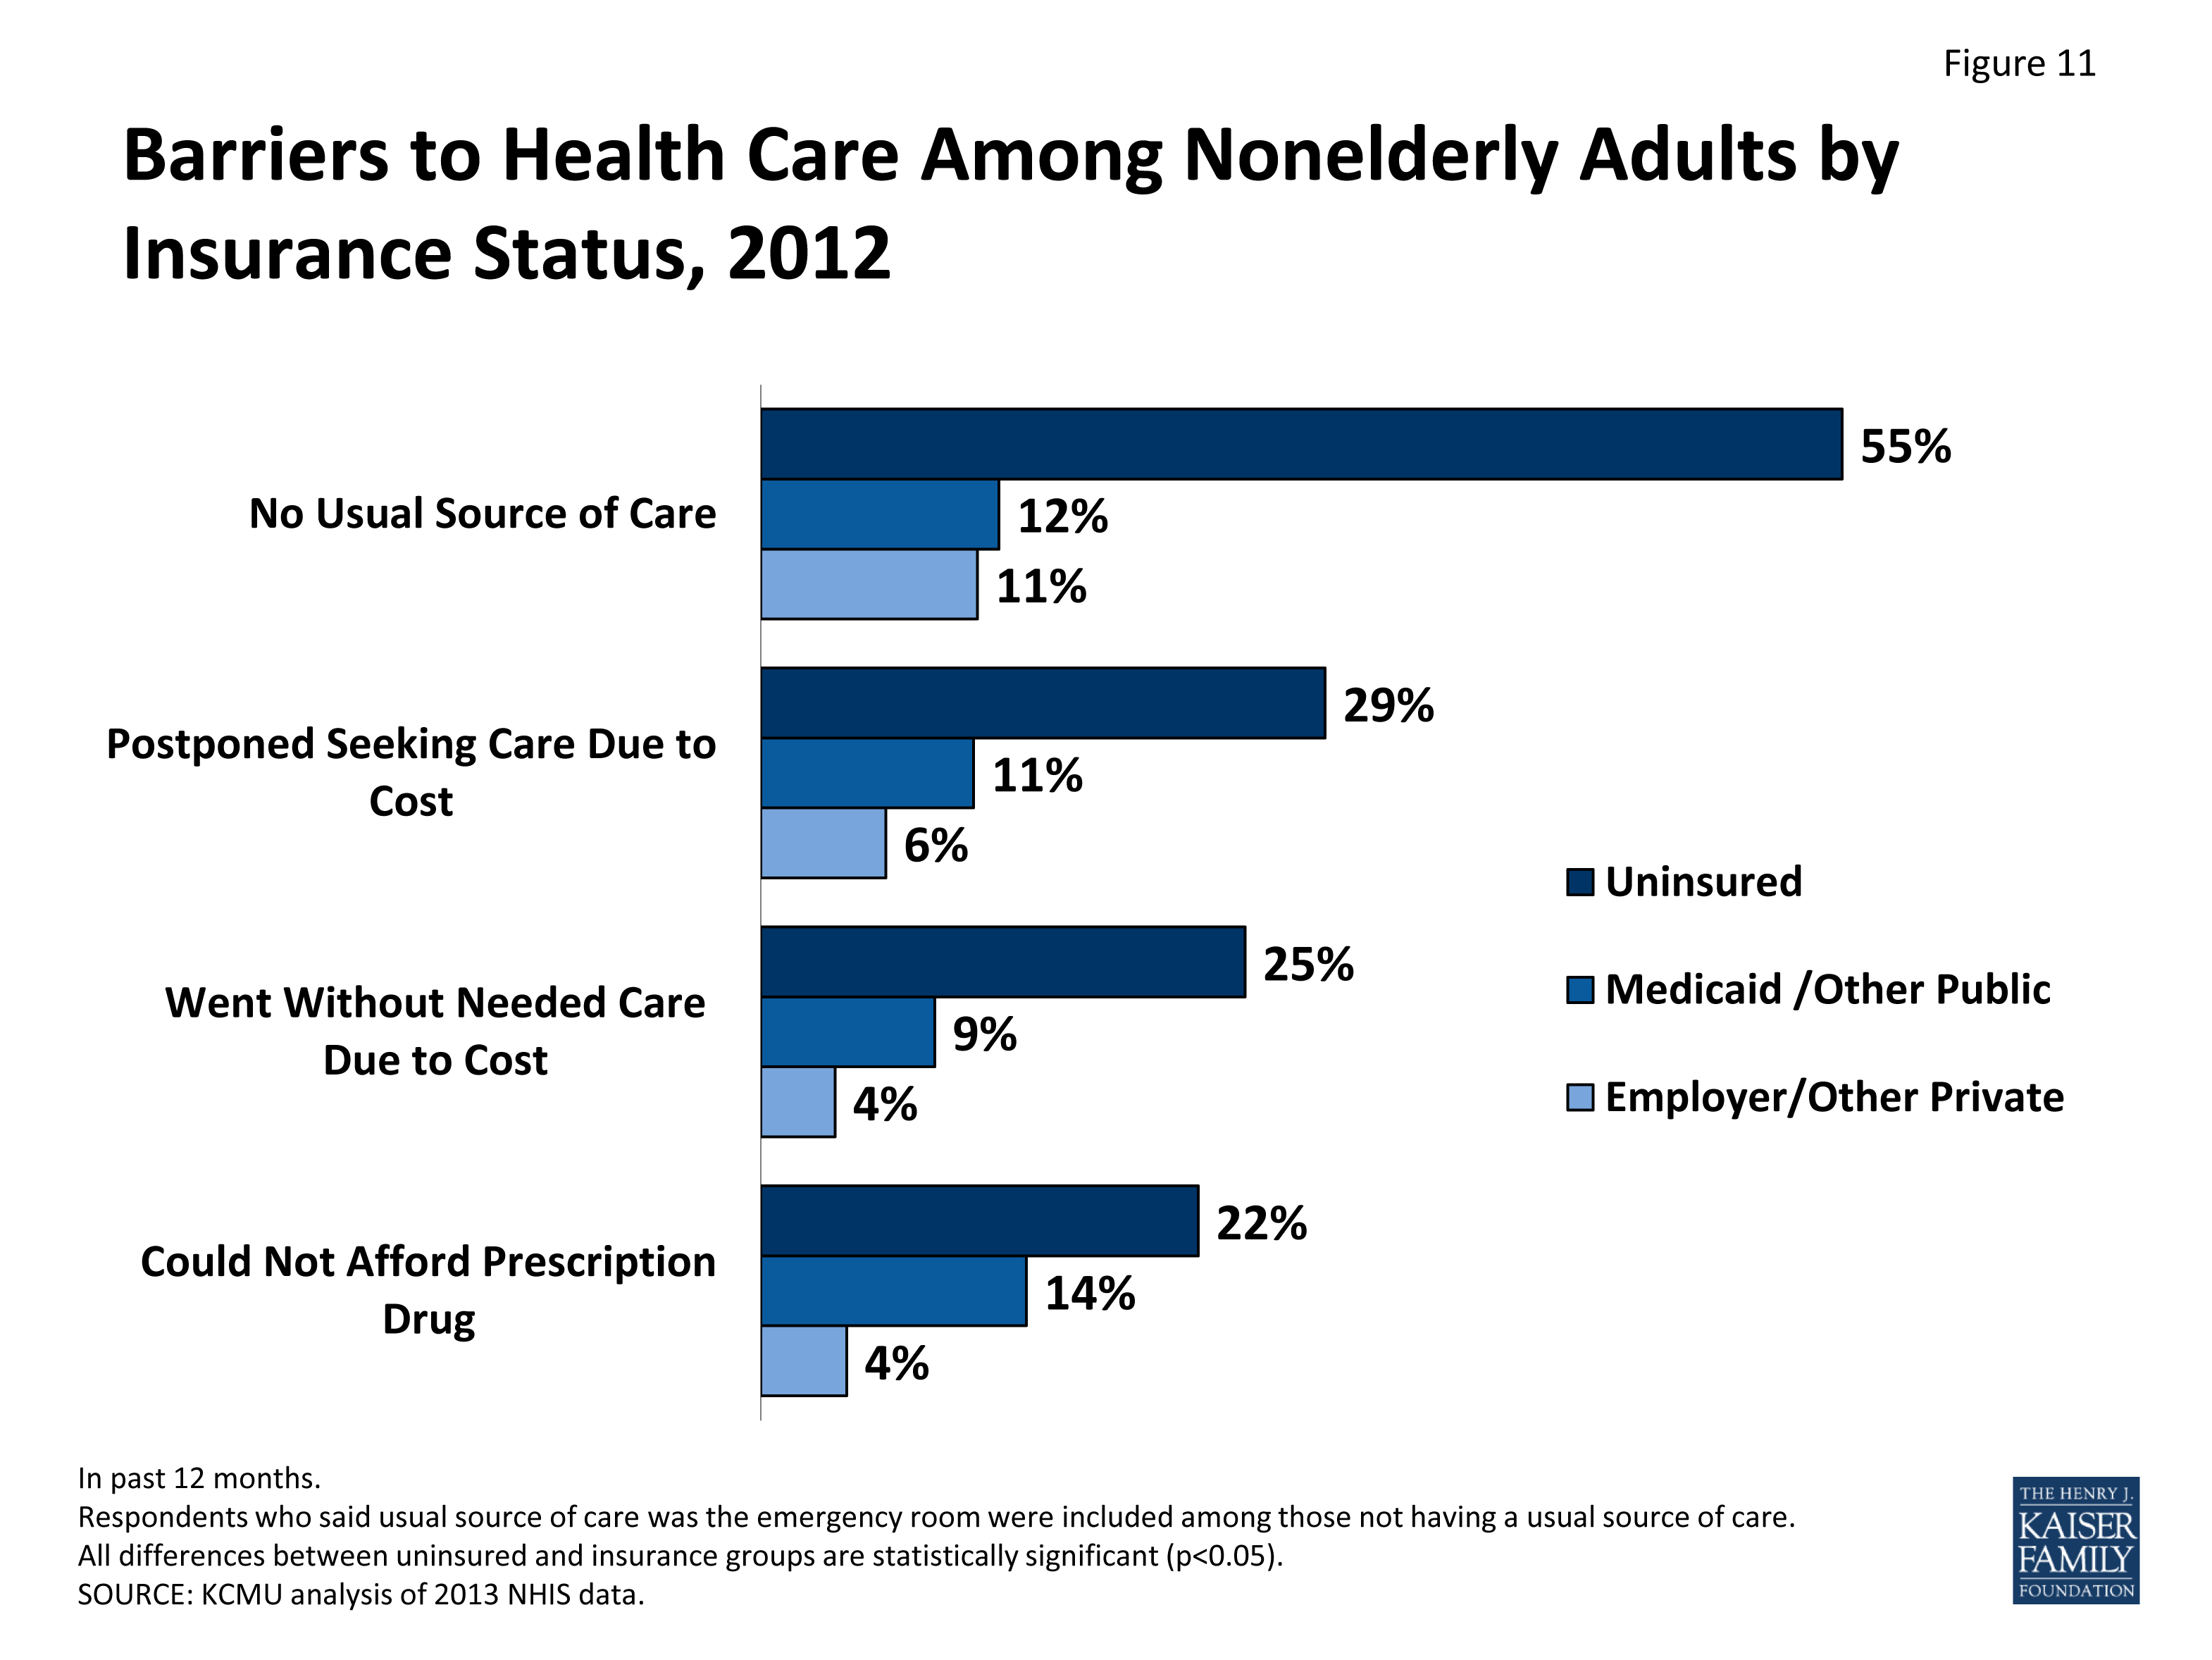 THE UNINSURED A PRIMER 2013 - 4: HOW DOES LACK OF INSURANCE AFFECT